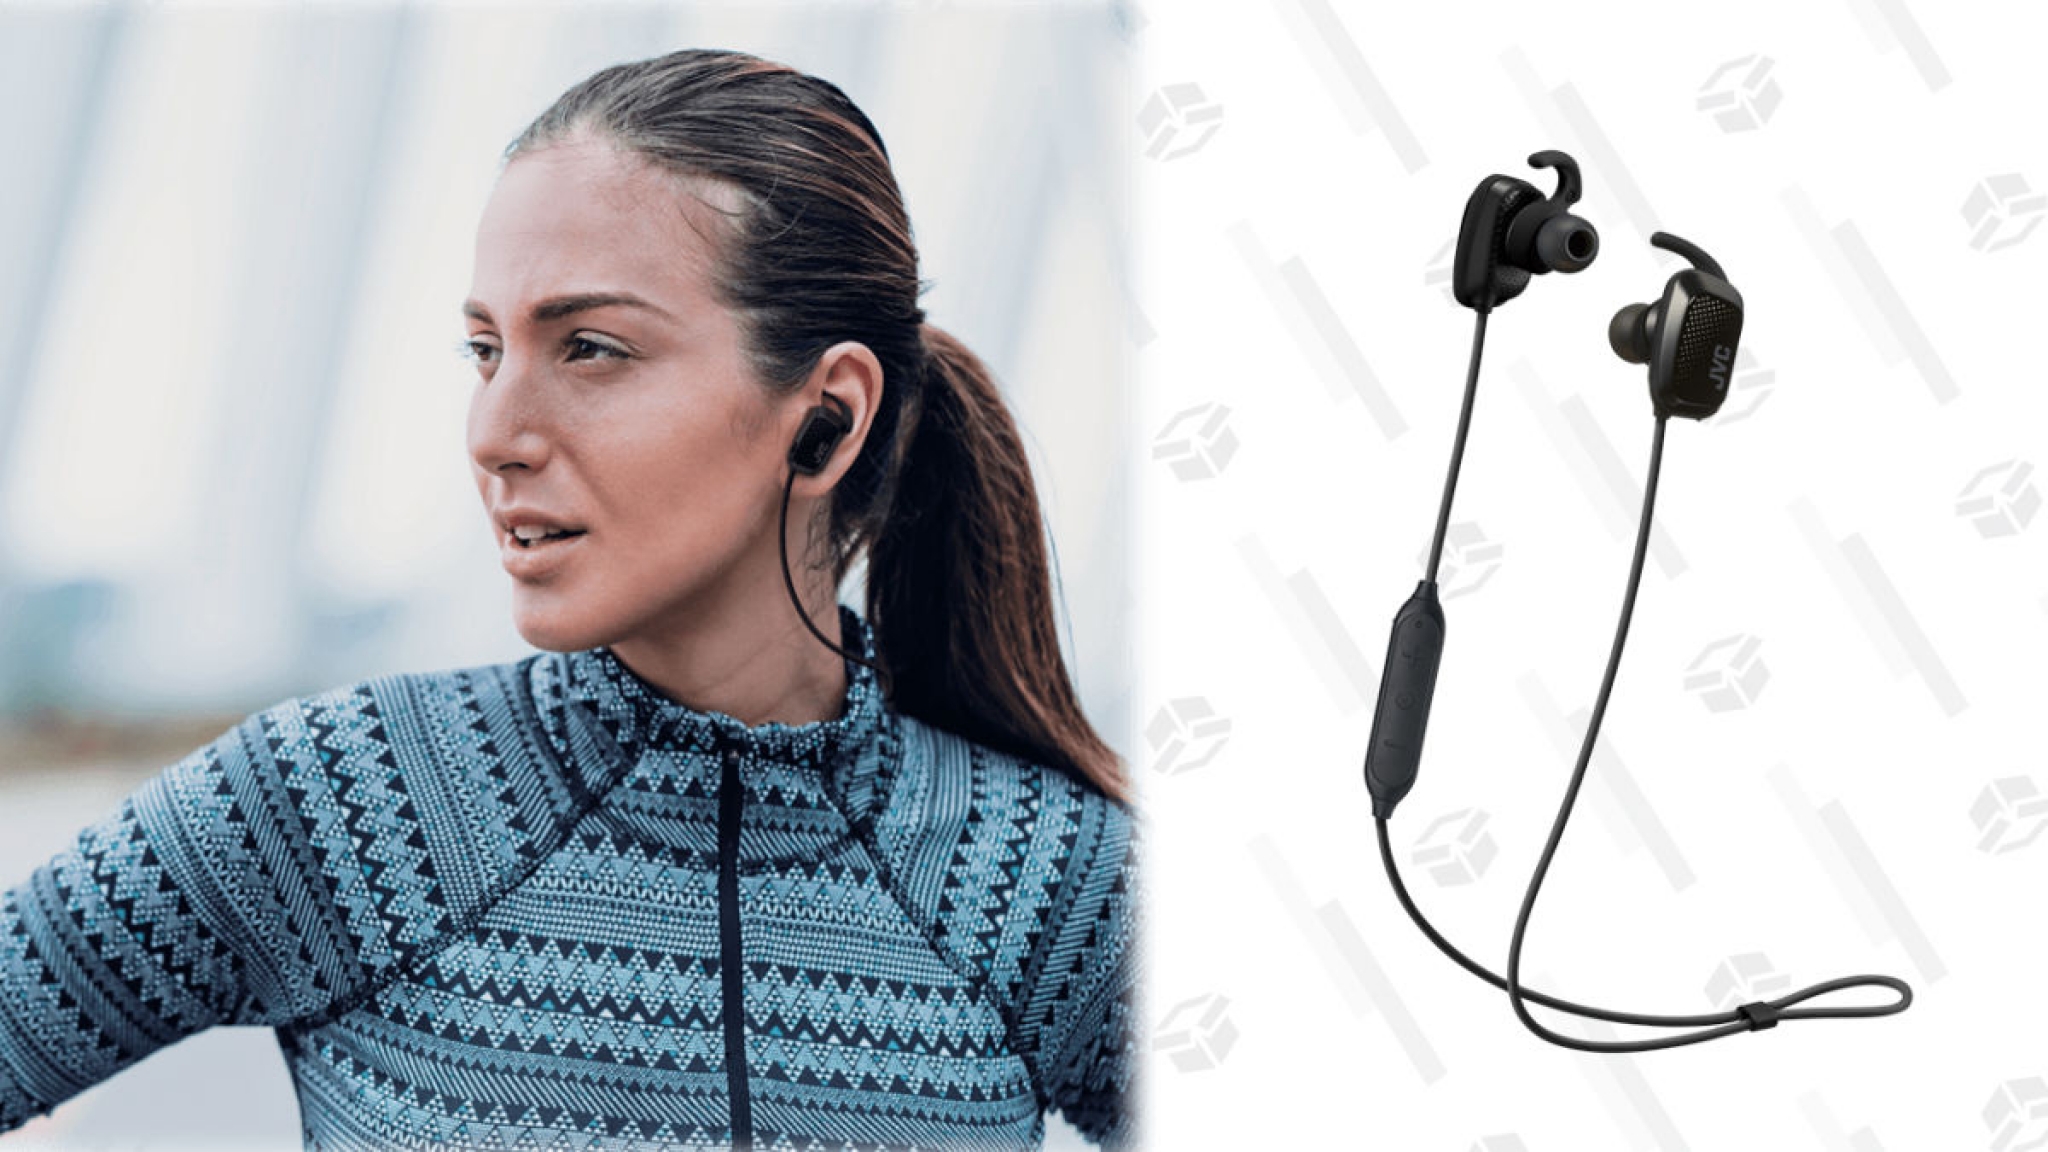 Up Your Running Game With an $18 Pair of Wireless Earbuds With Live Coaching